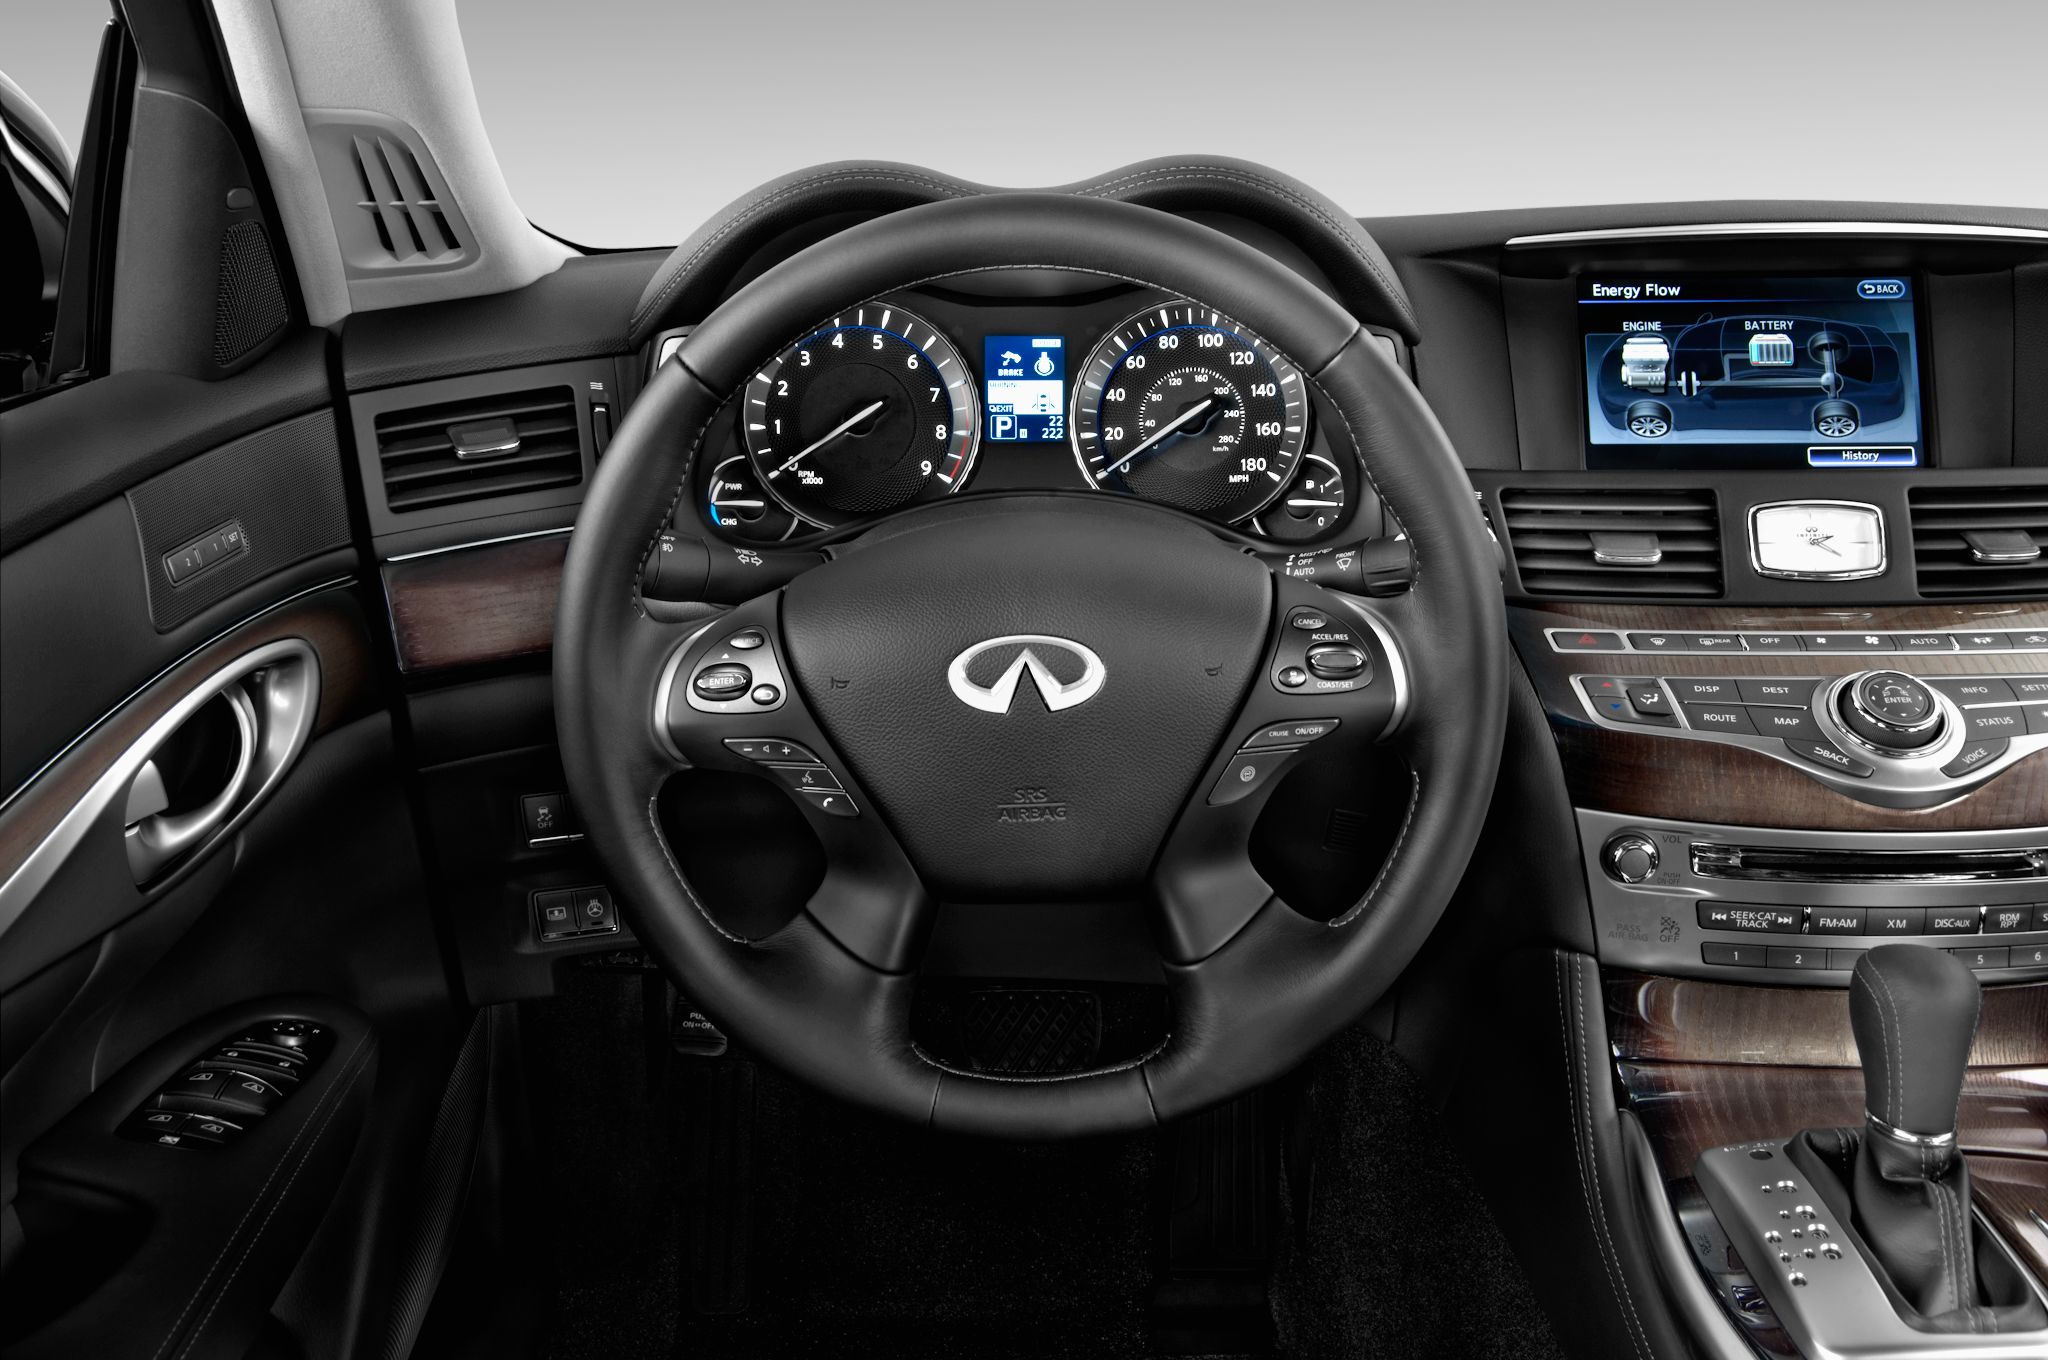 Infiniti Q70 Hybrid: Exceptional Features to Infinity and Beyond